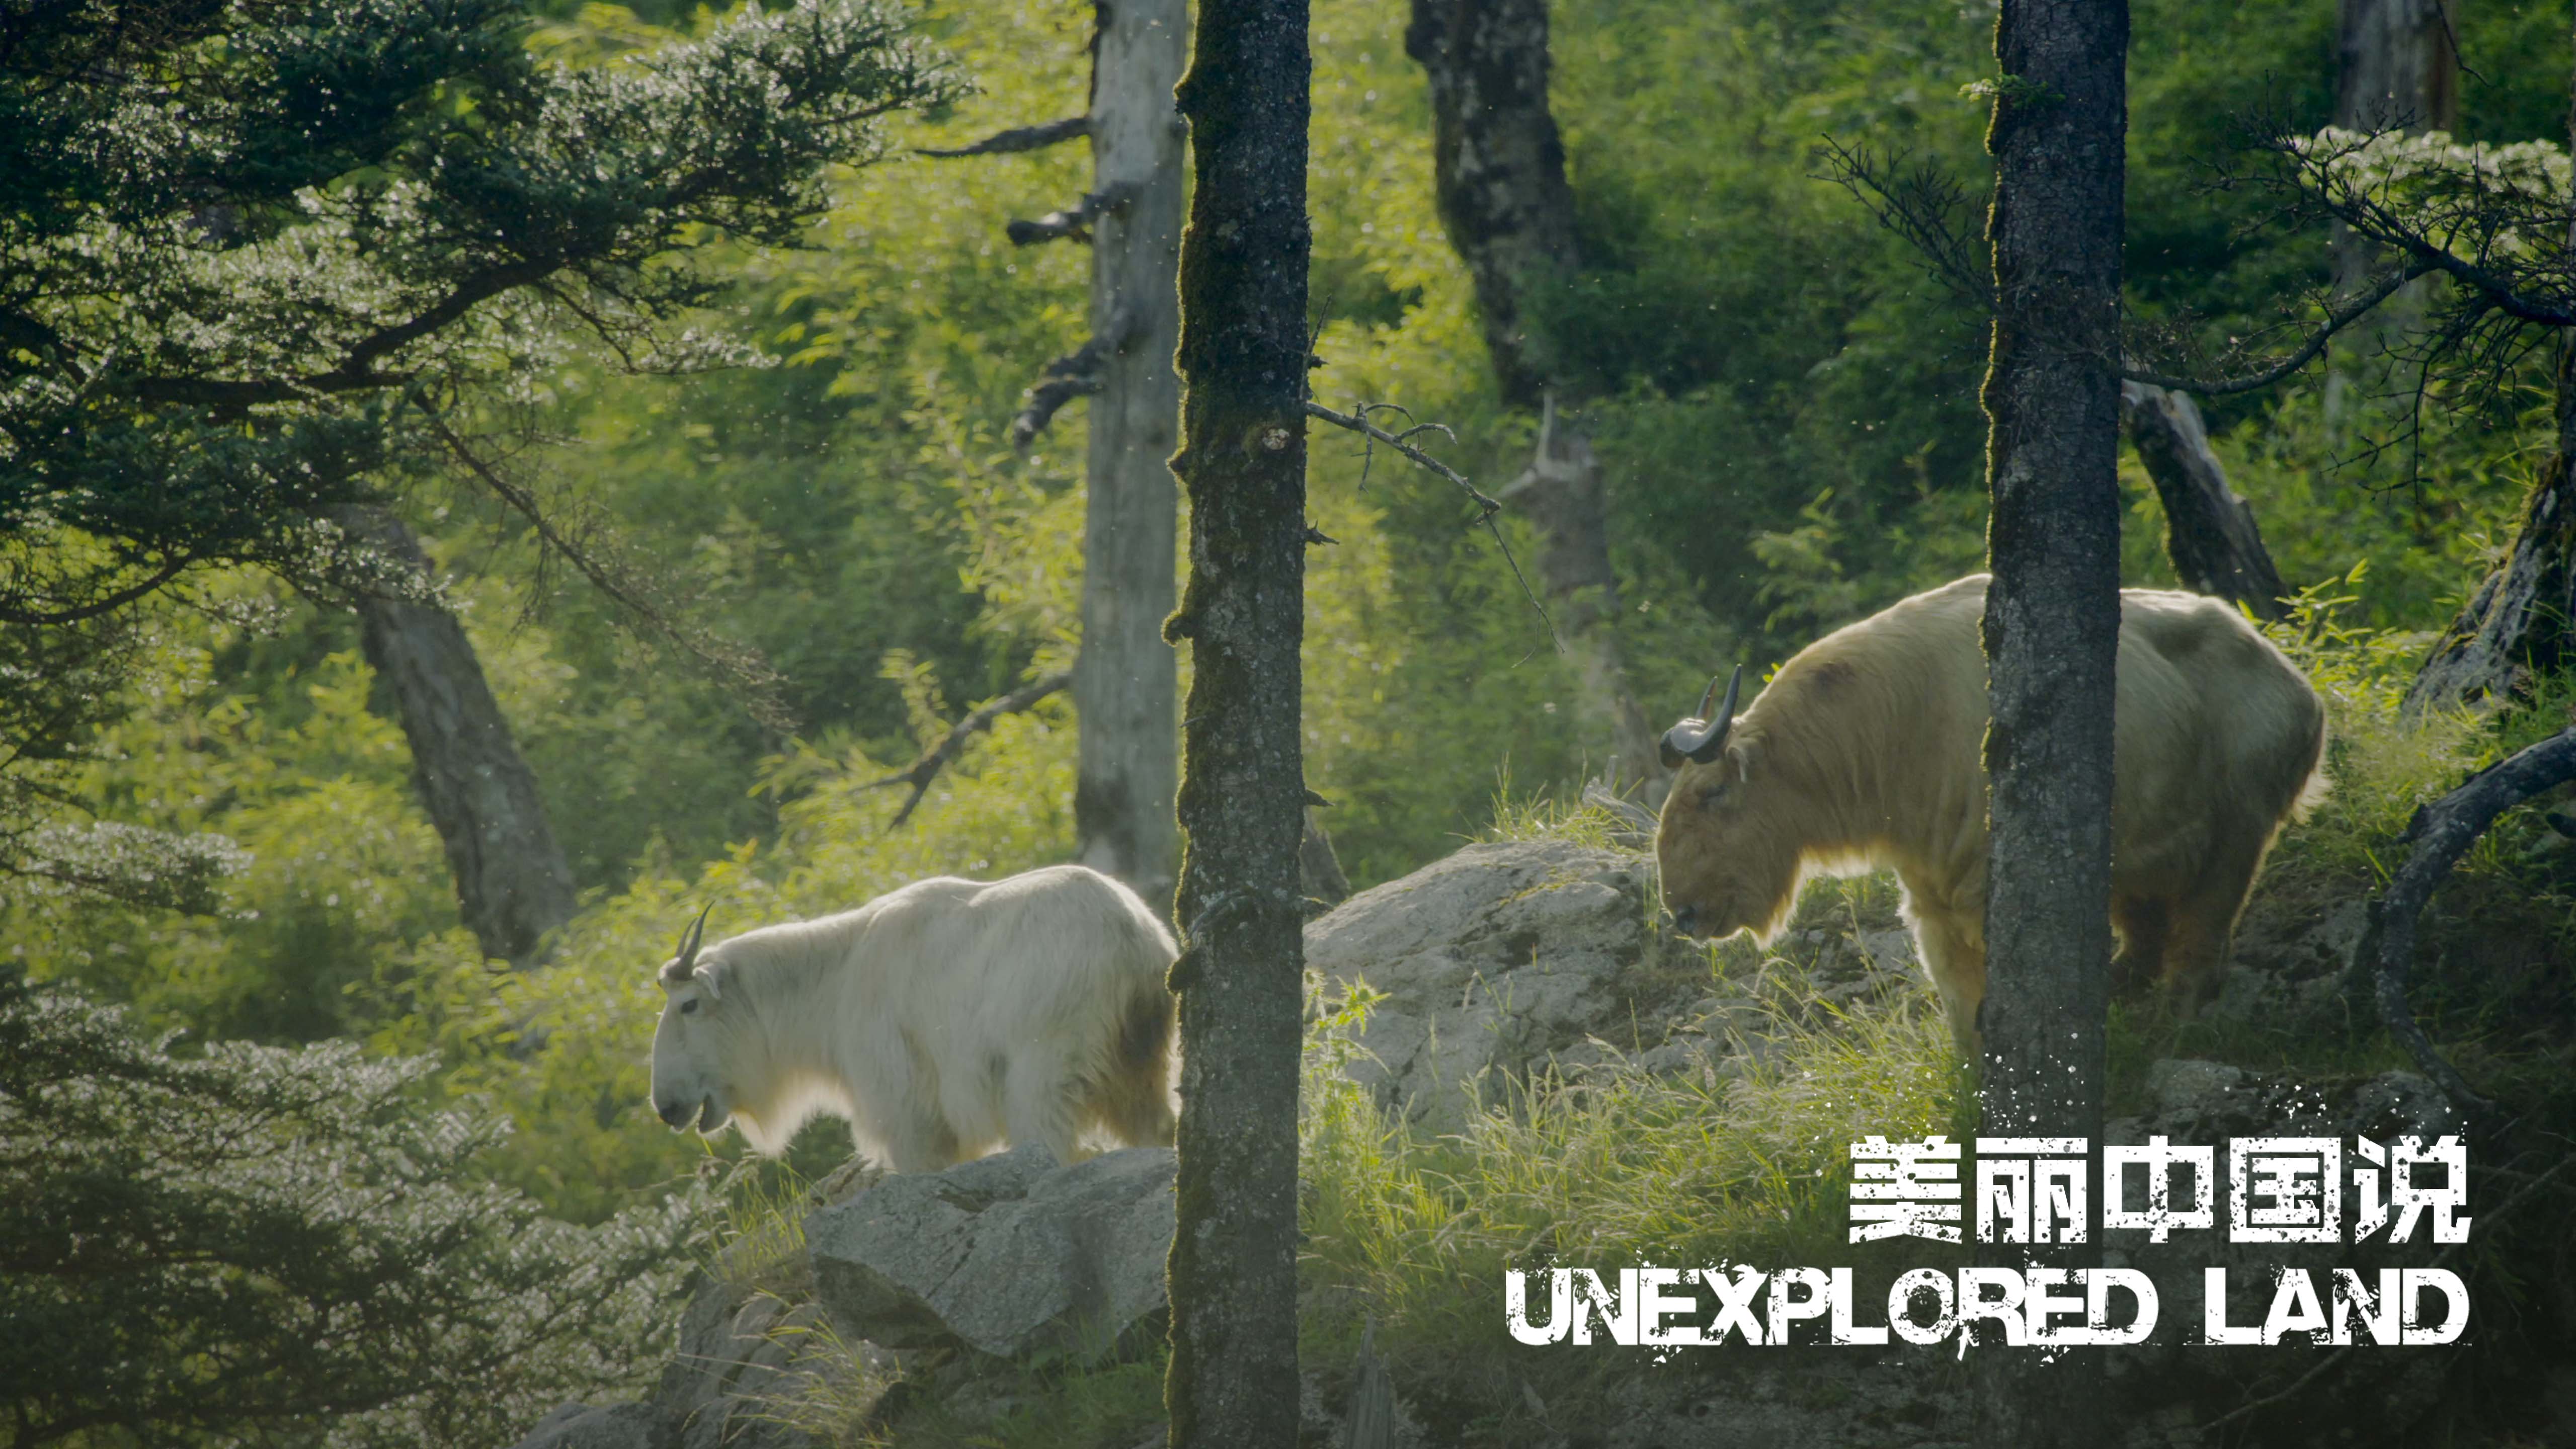 Unexplored Land: Their growing stories in Qinling Mountains - CGTN